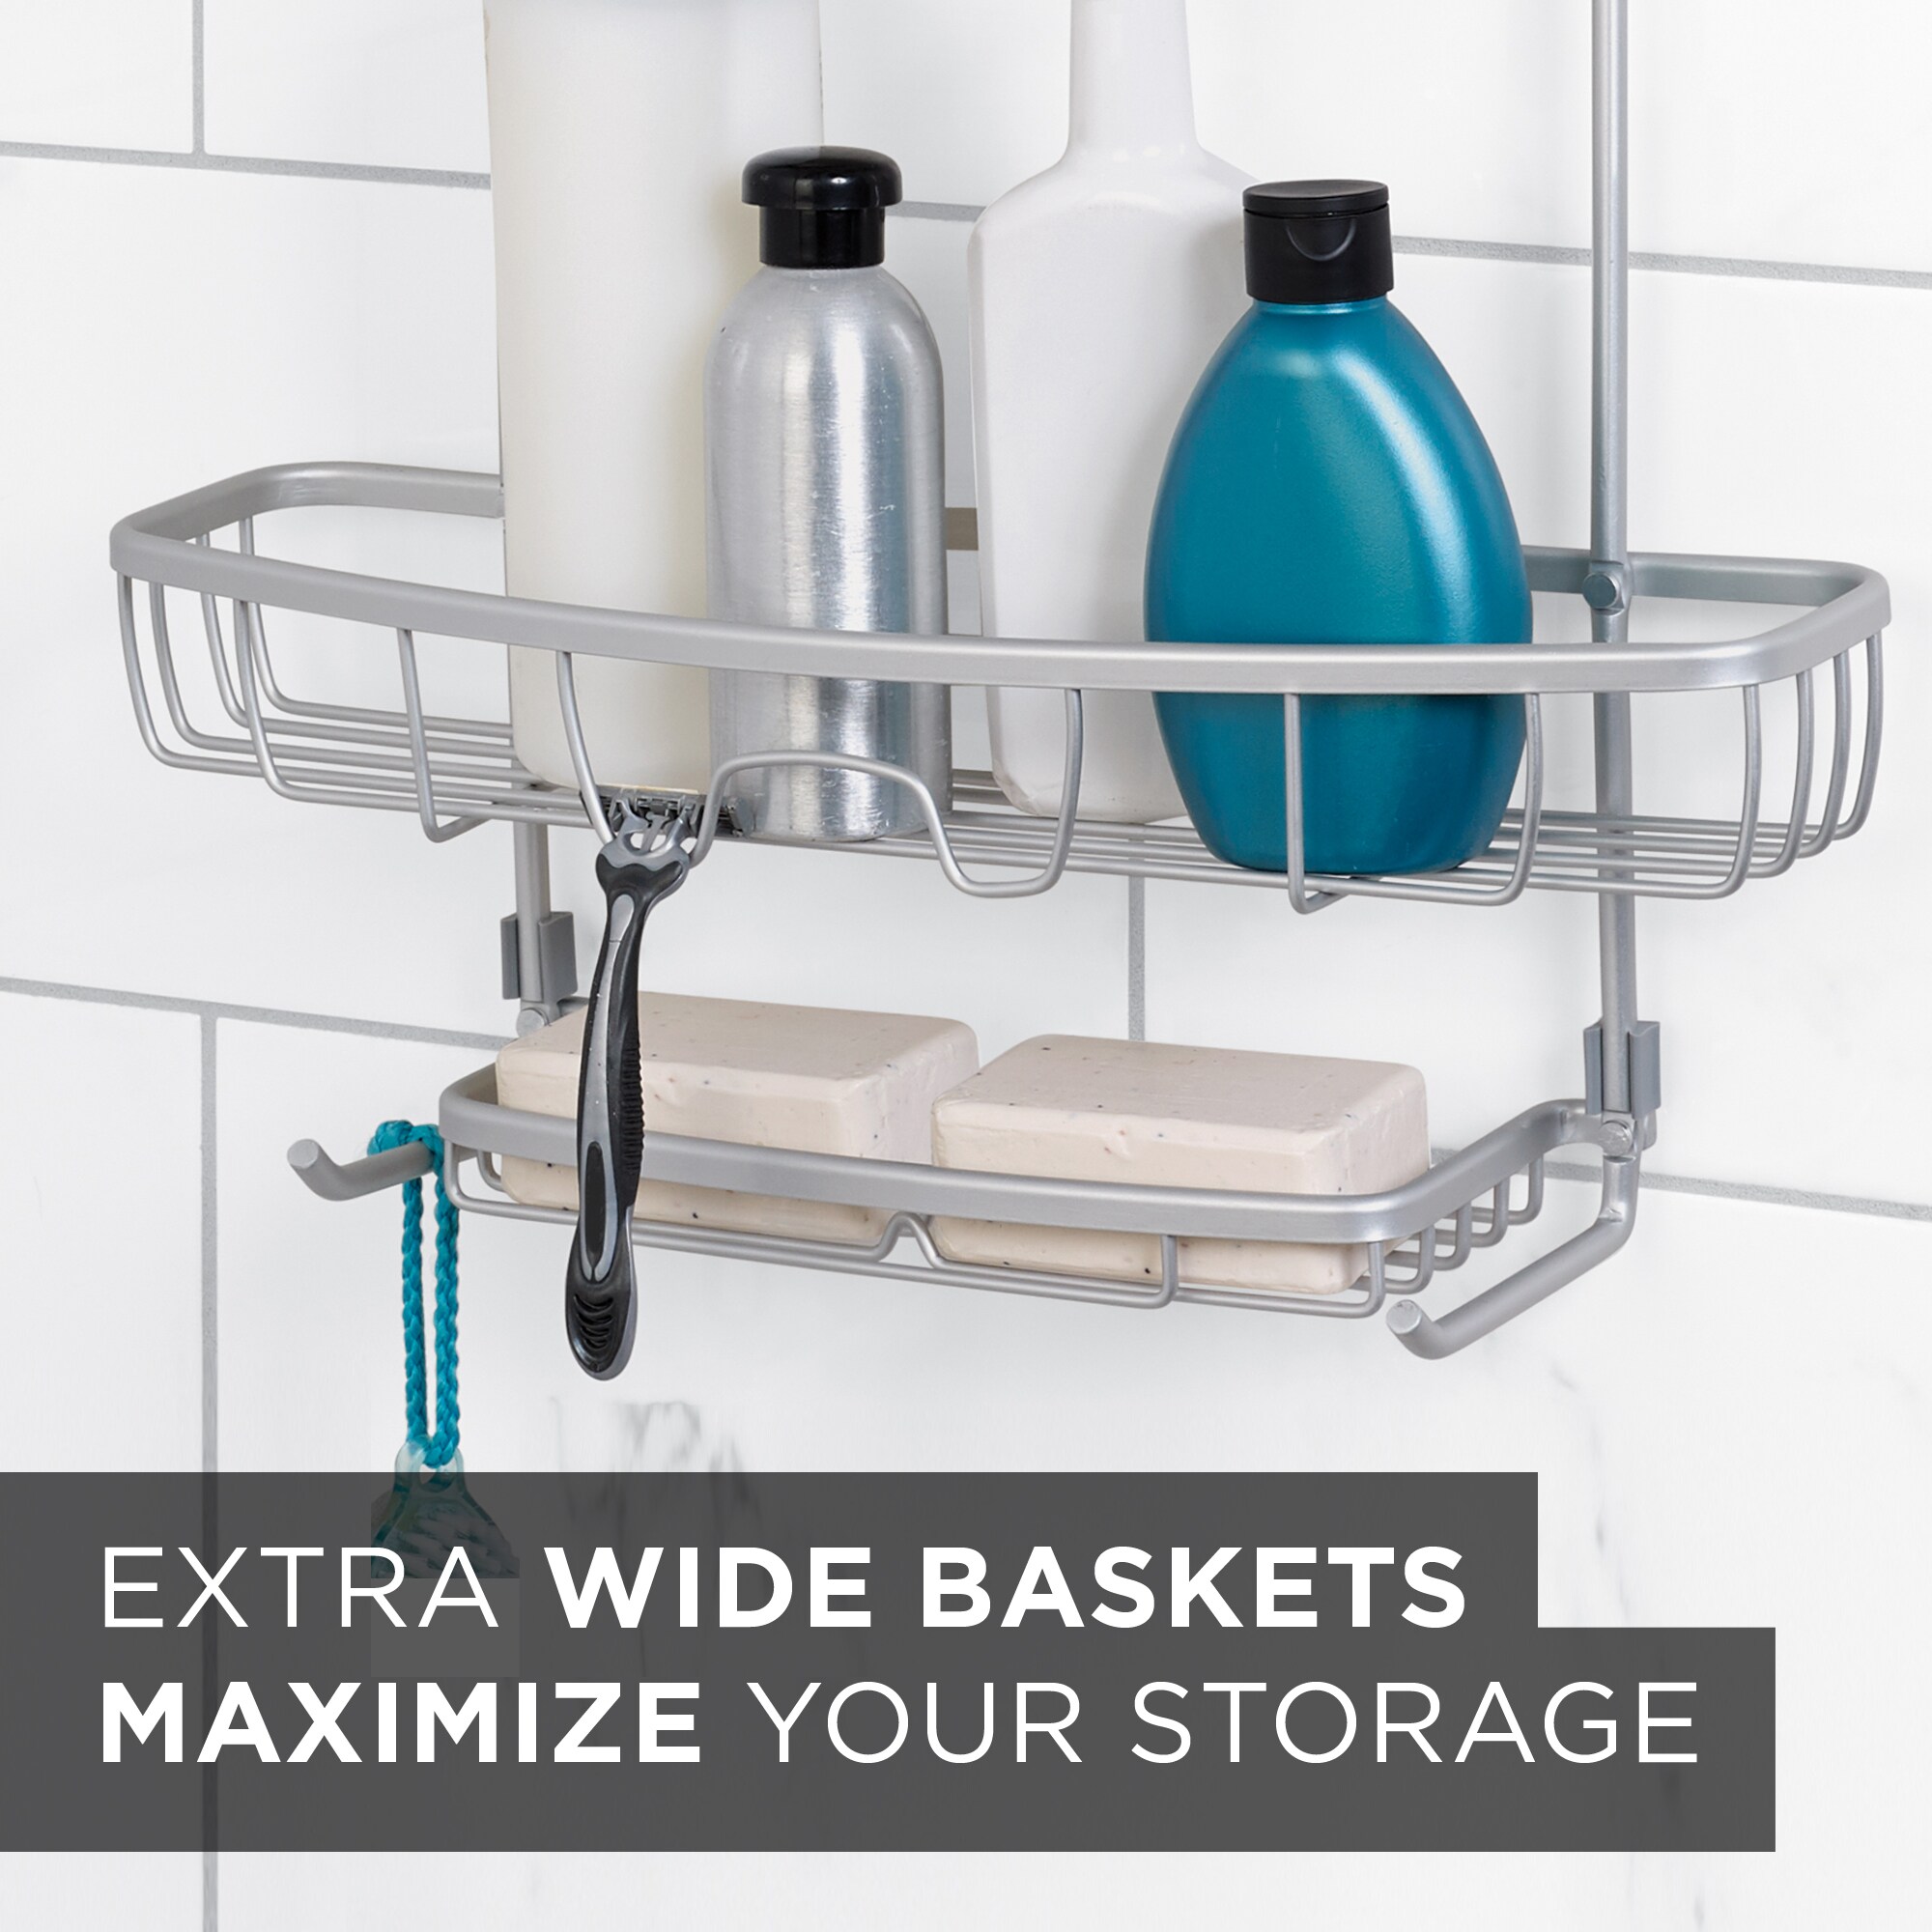 Zenna Home Bathroom Organizer Shower Caddy or Storage for Kitchen, Pantry,  Closet, Kids Toys, with 2 Baskets and 3 Hooks, Adjustable Tension Rod, No